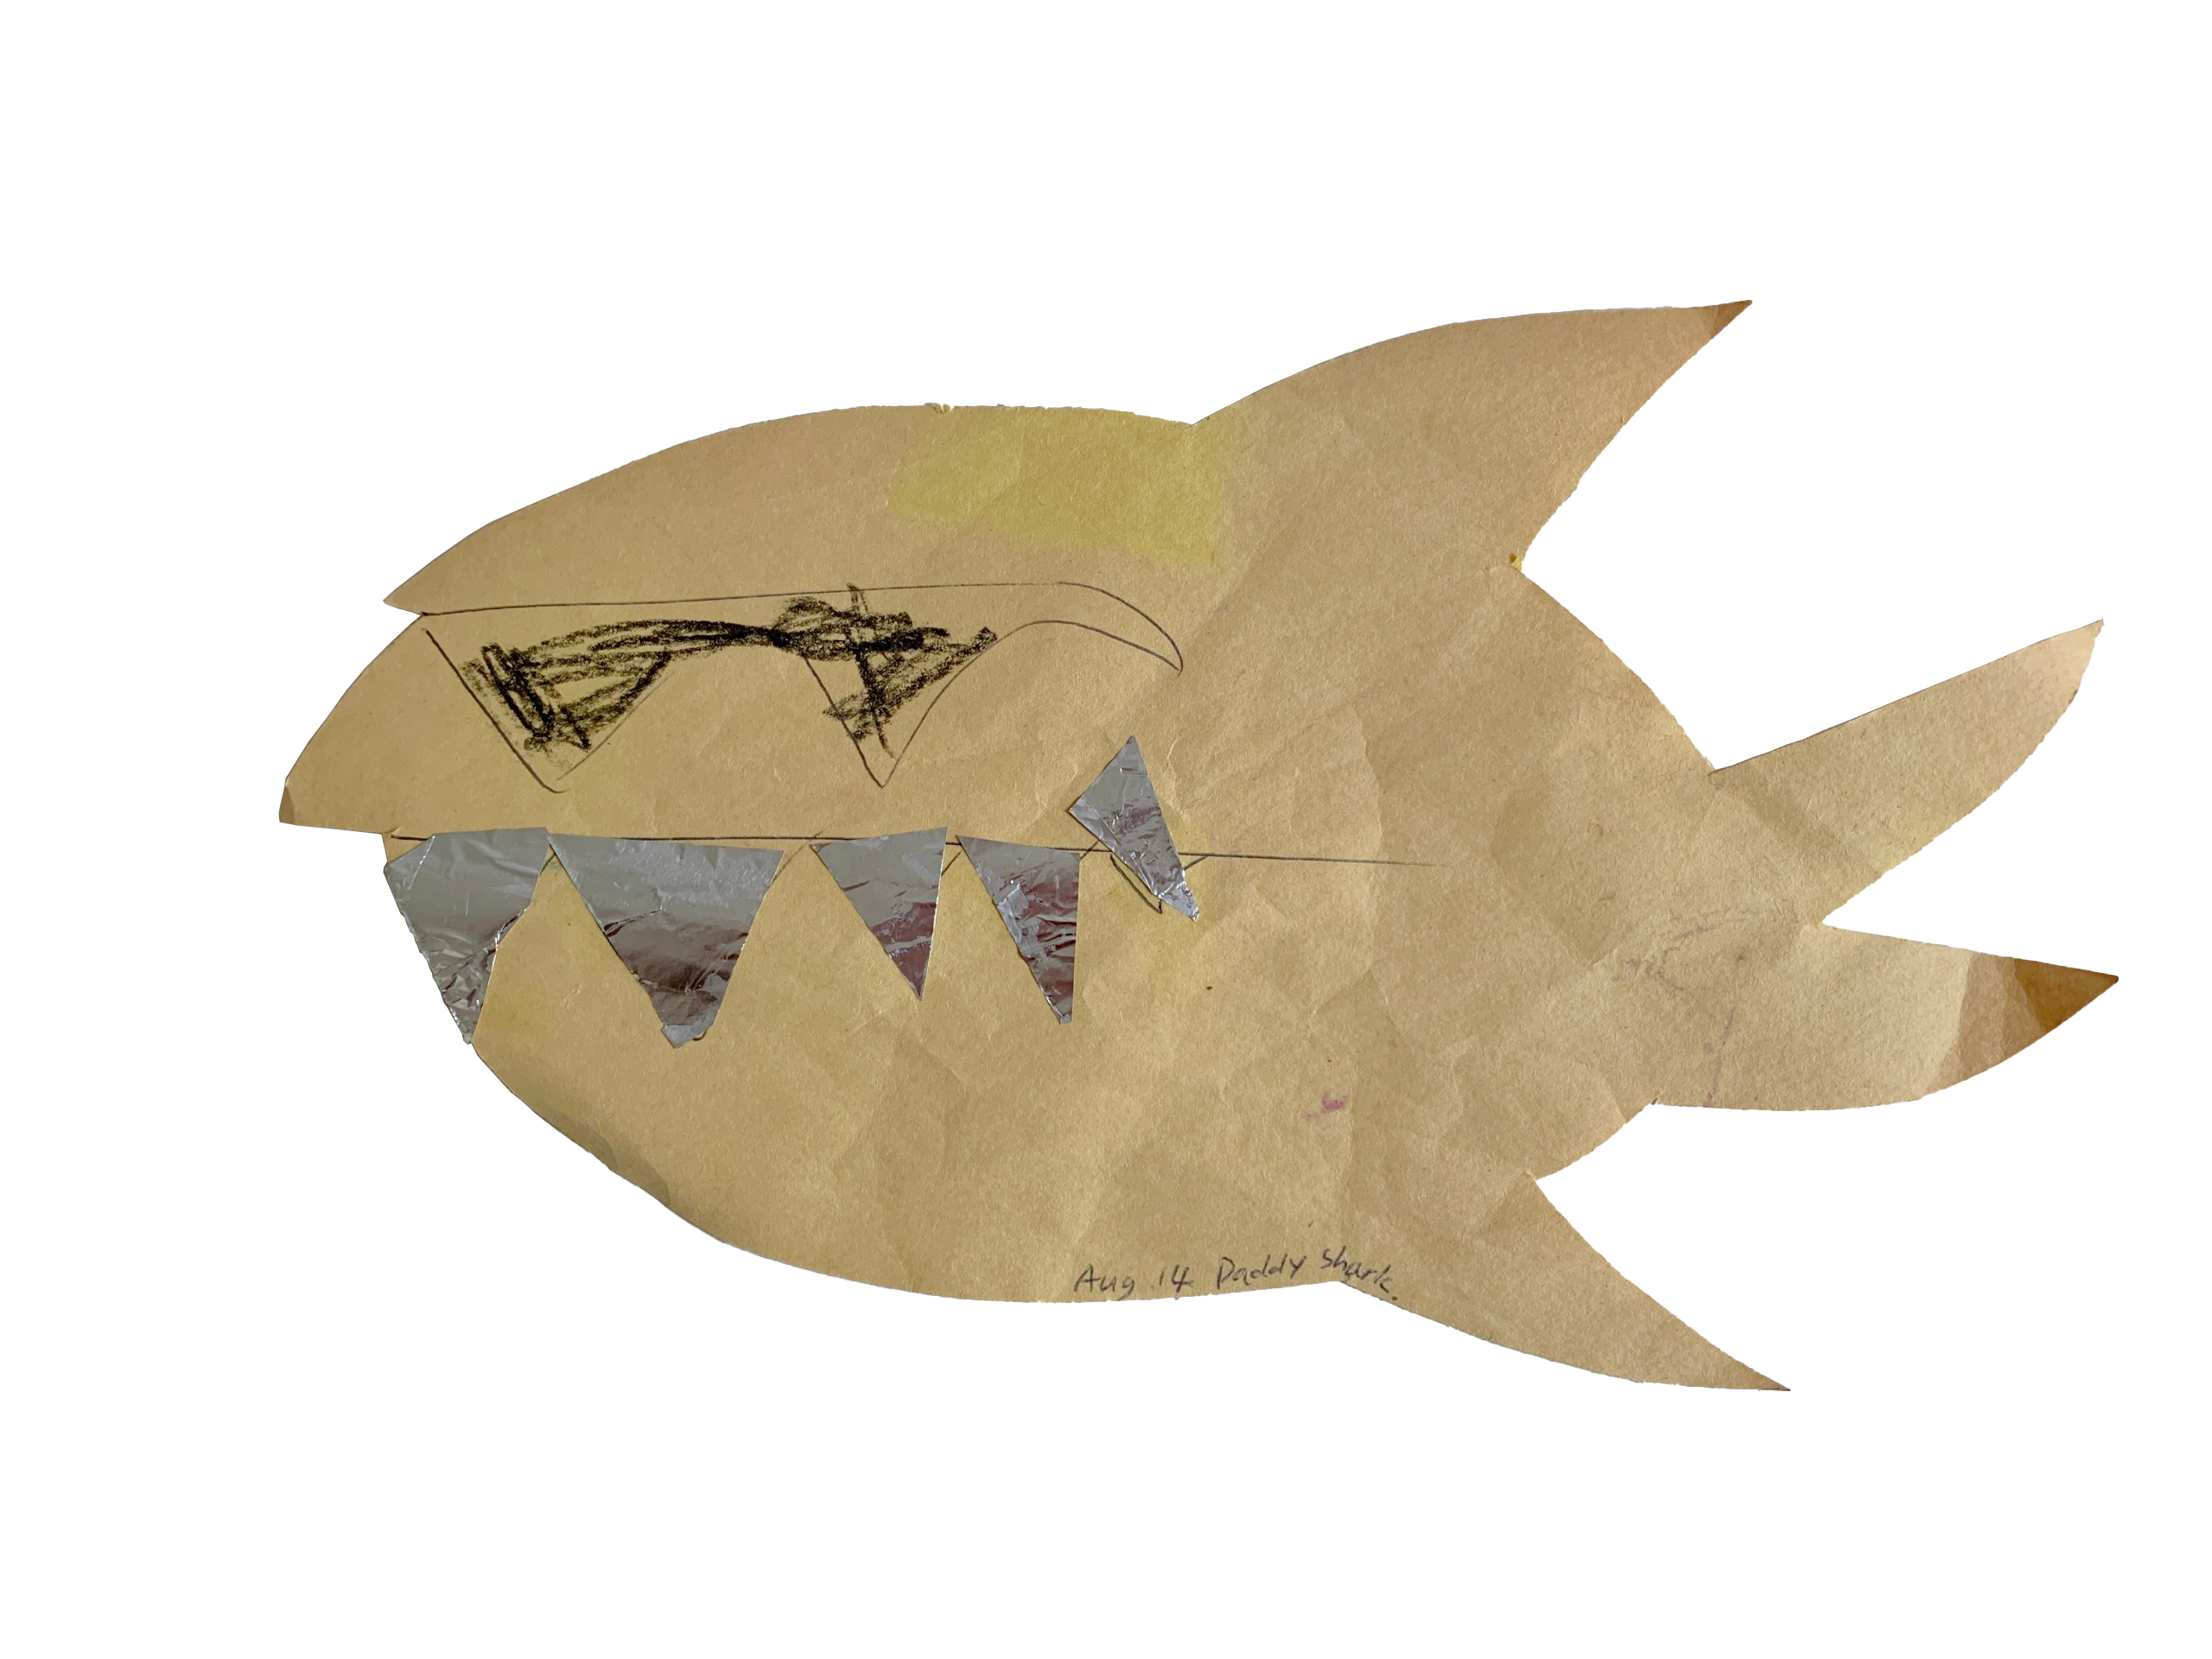 A child's craft project representing 'Daddy Shark' from the popular song, featuring a yellow construction paper shark with crudely drawn black sunglasses and jagged silver teeth.